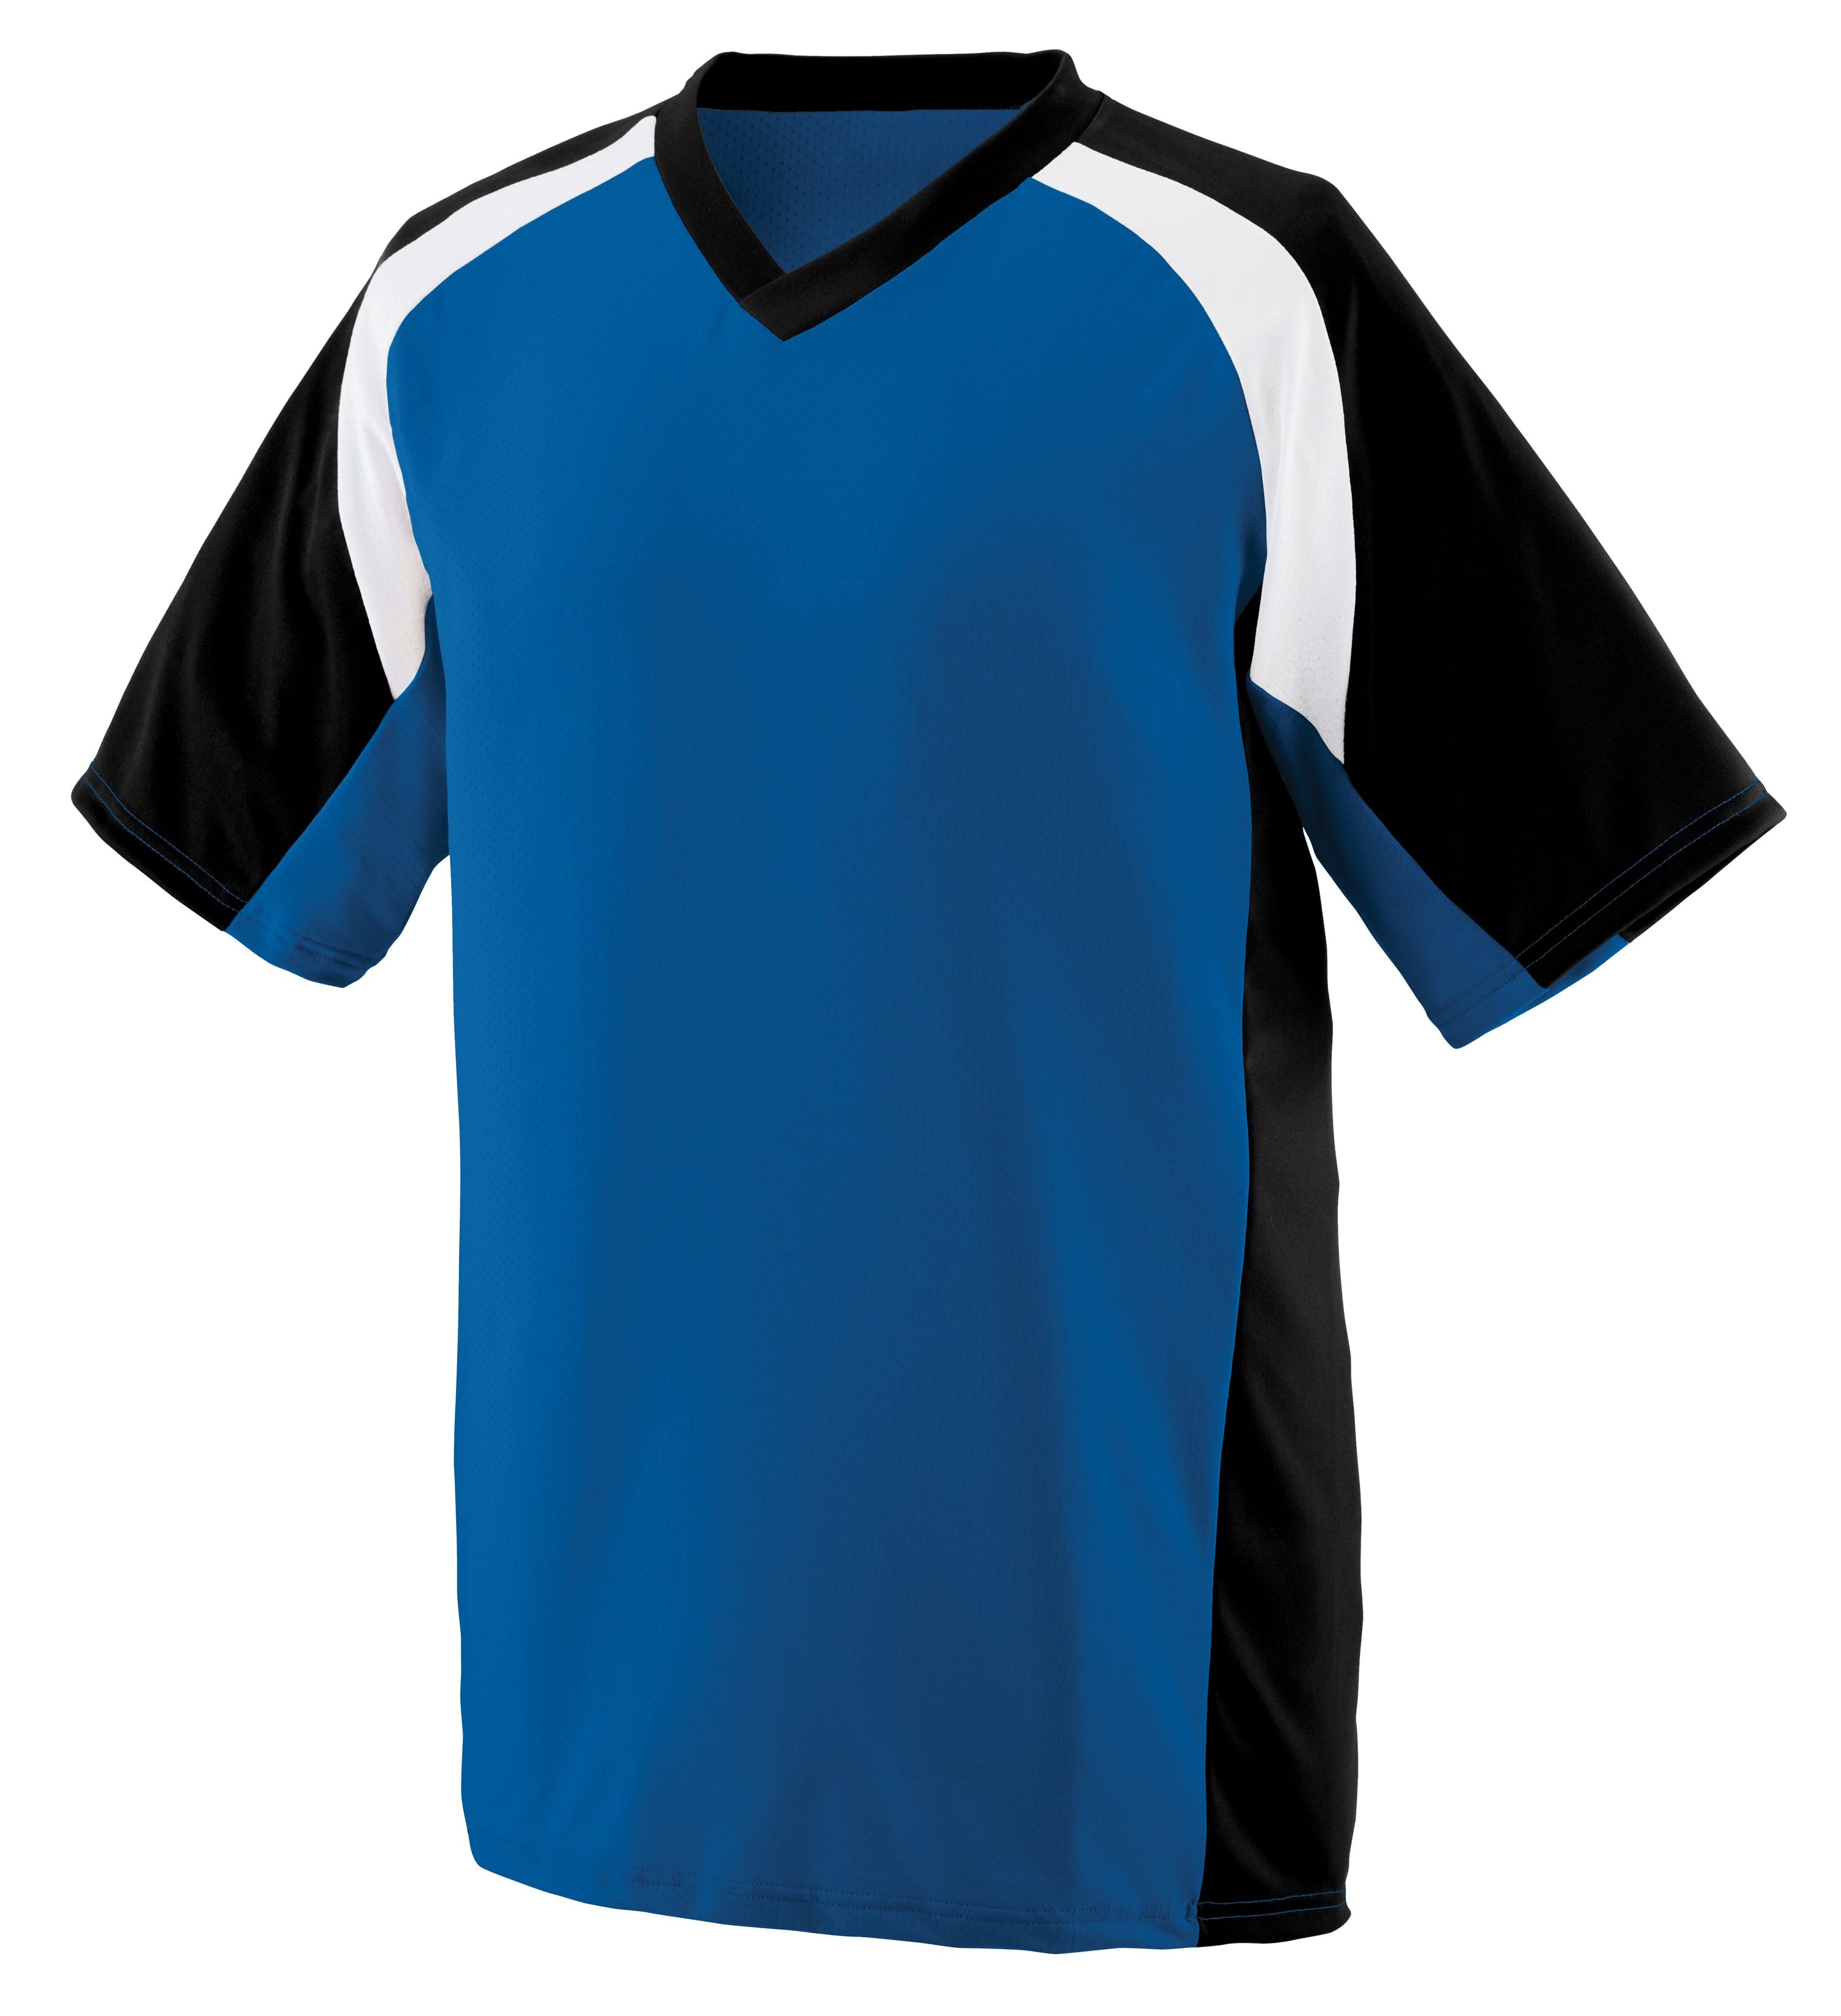 Augusta Sportswear Nitro Jersey in Royal/Black/White  -Part of the Adult, Adult-Jersey, Augusta-Products, Football, Shirts, All-Sports, All-Sports-1 product lines at KanaleyCreations.com